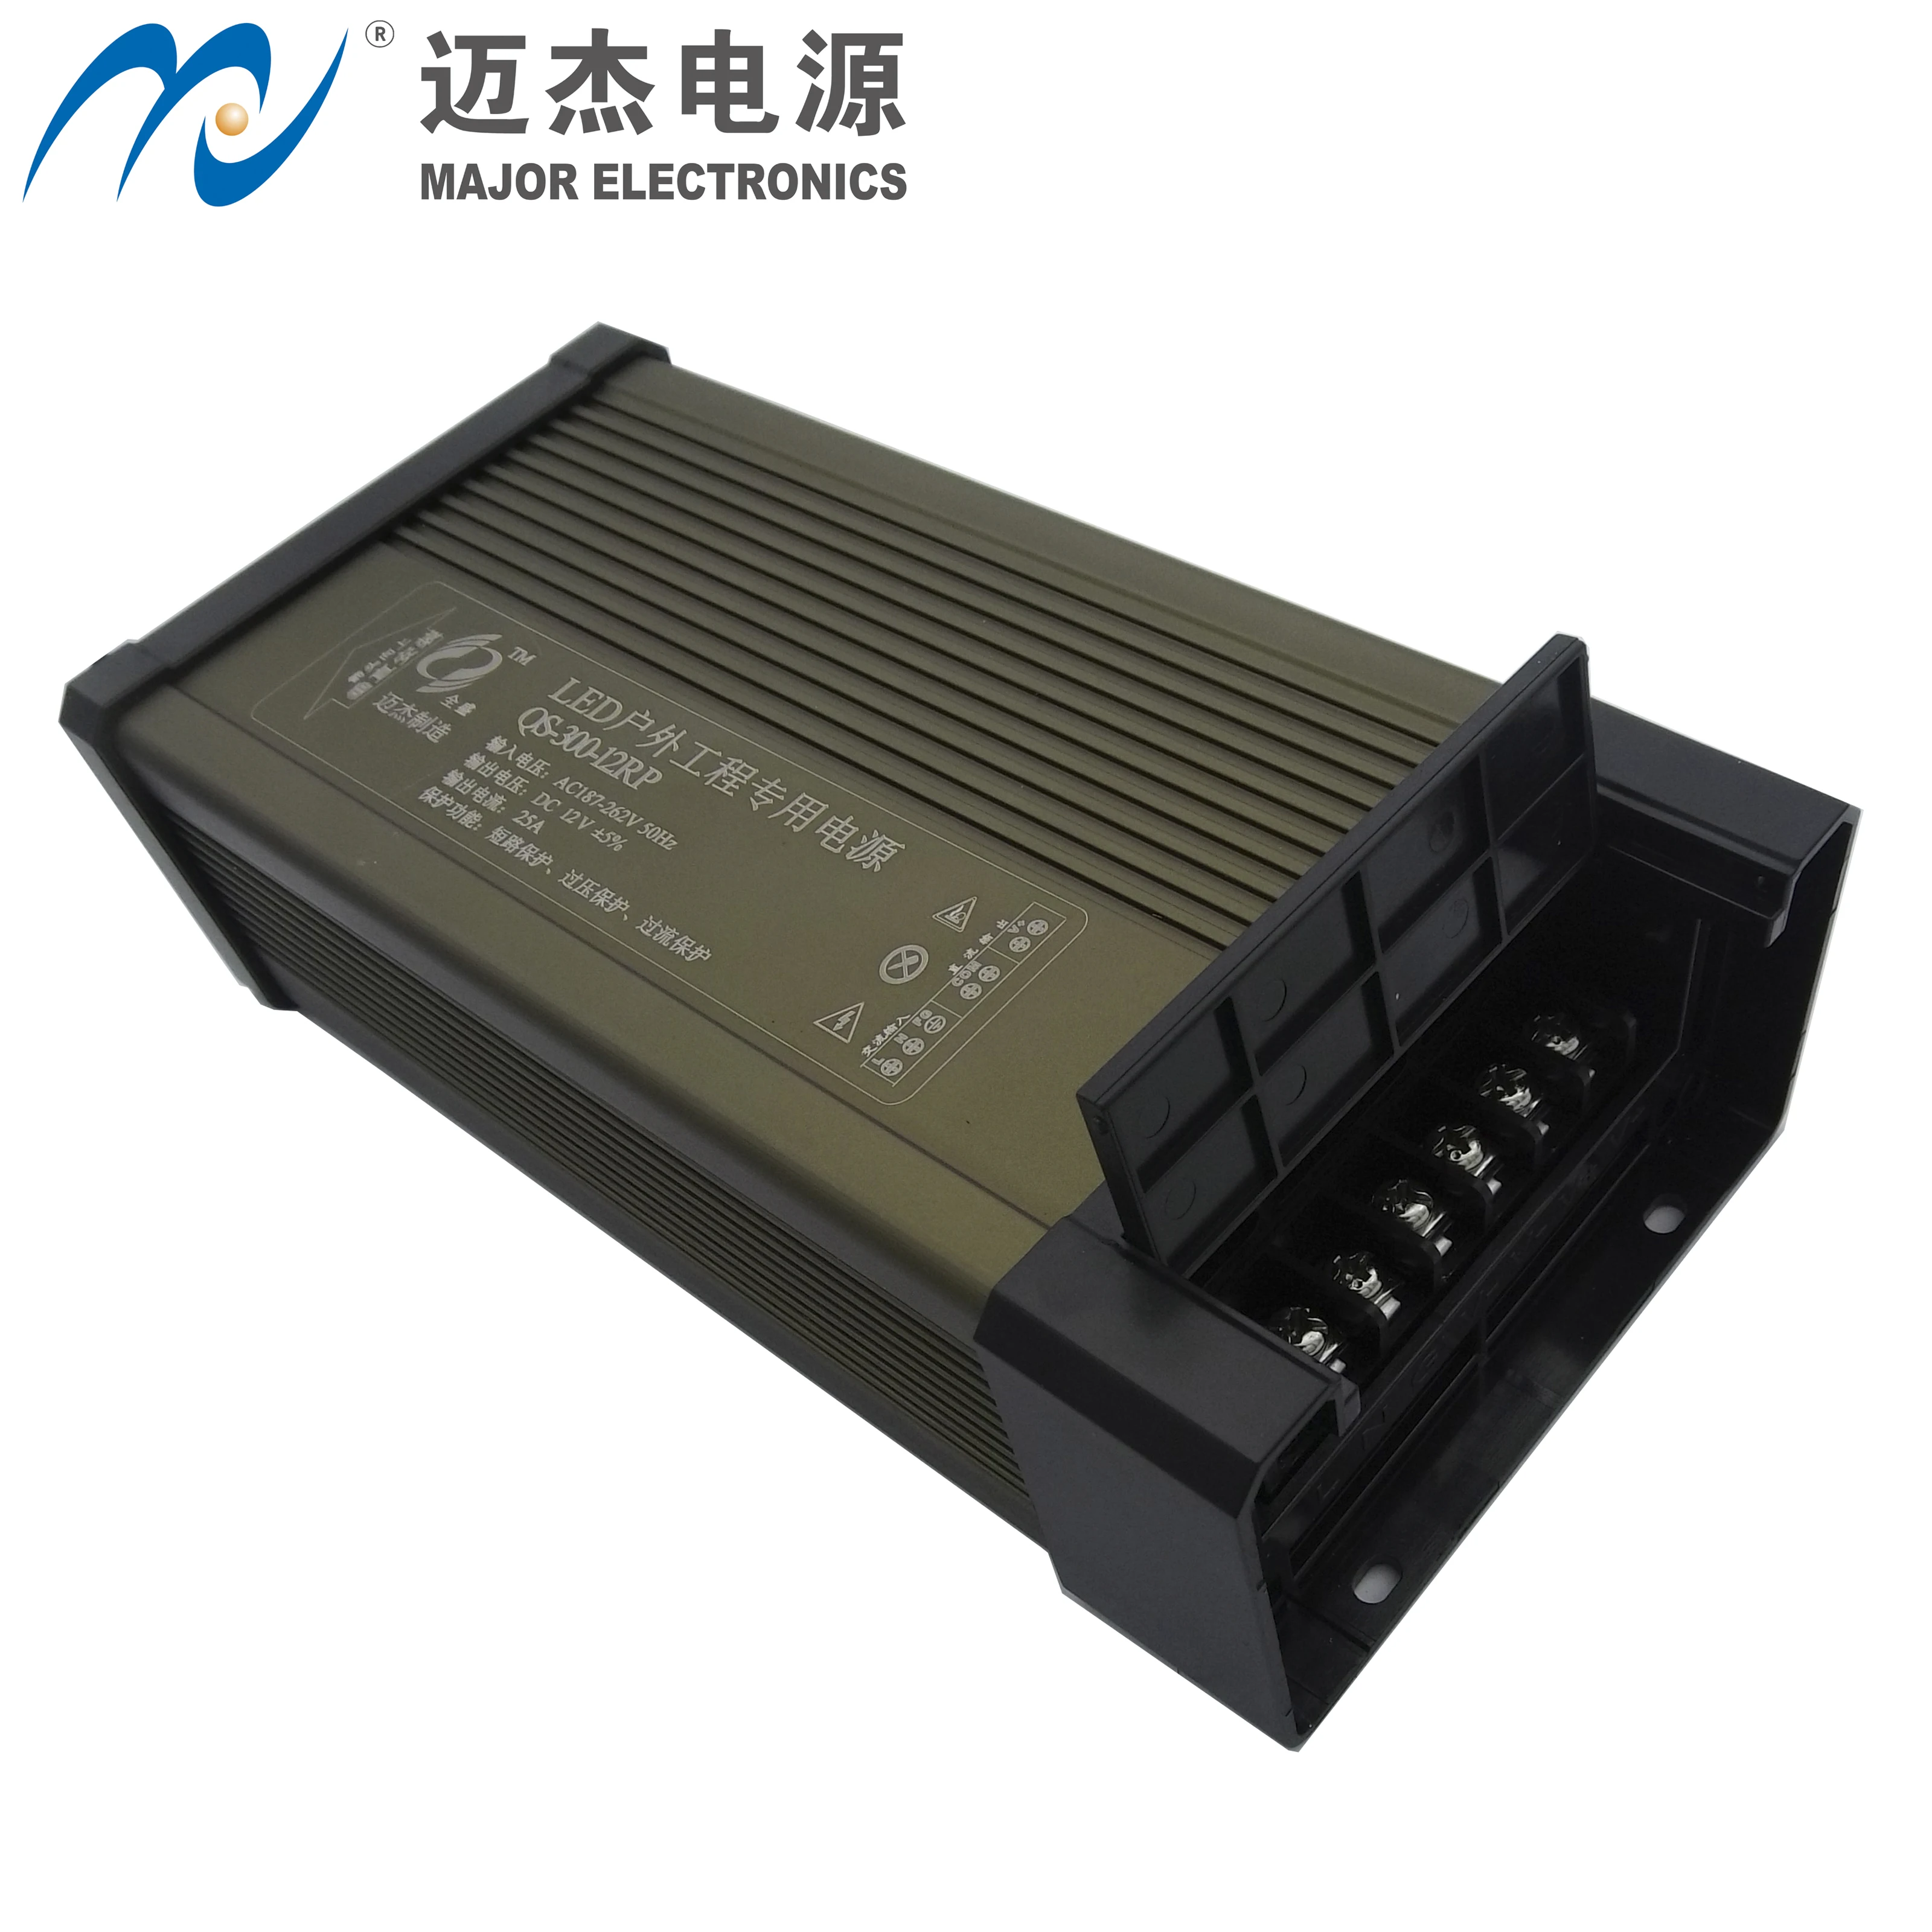 cctv power supply China manufacture factory dc12v 300w switching mode power supply  2 years warranty  electronics circuit board